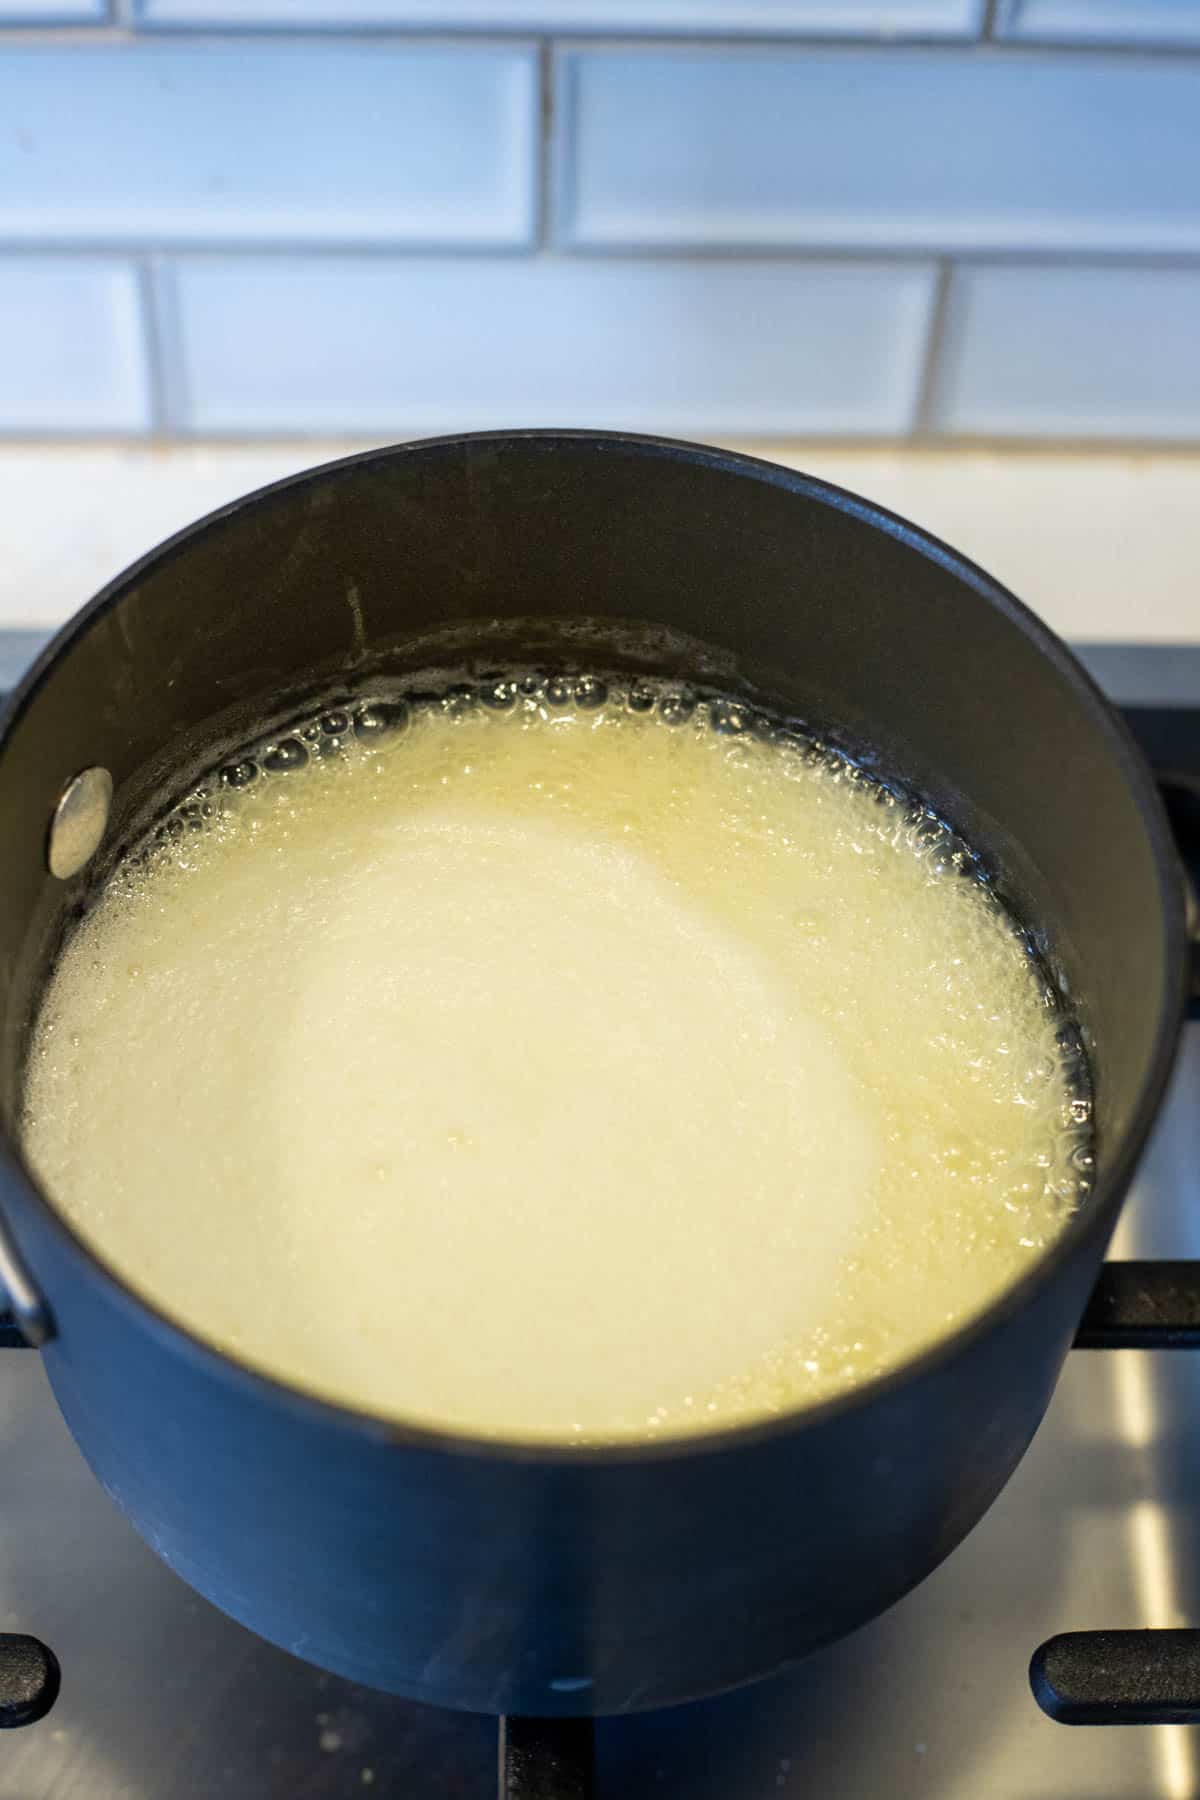 Buttermilk syrup boiling in a saucepan.